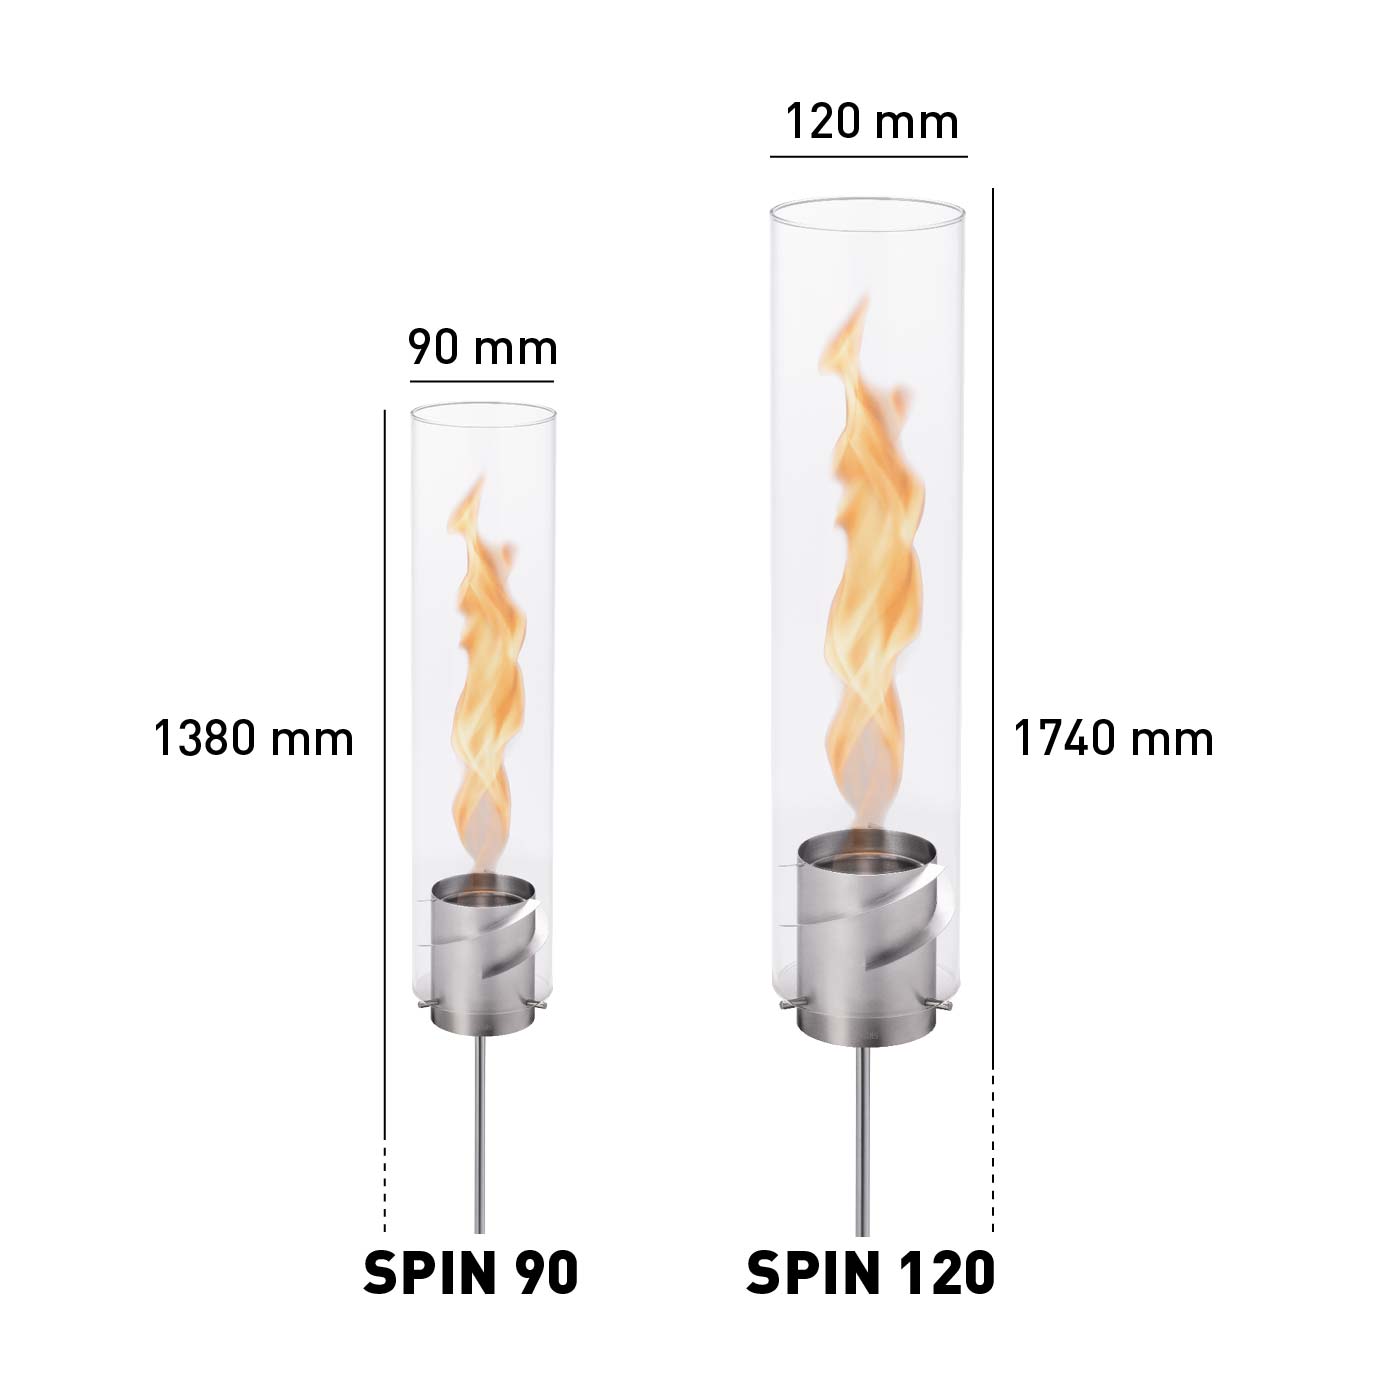 SPIN 120 Torch silver